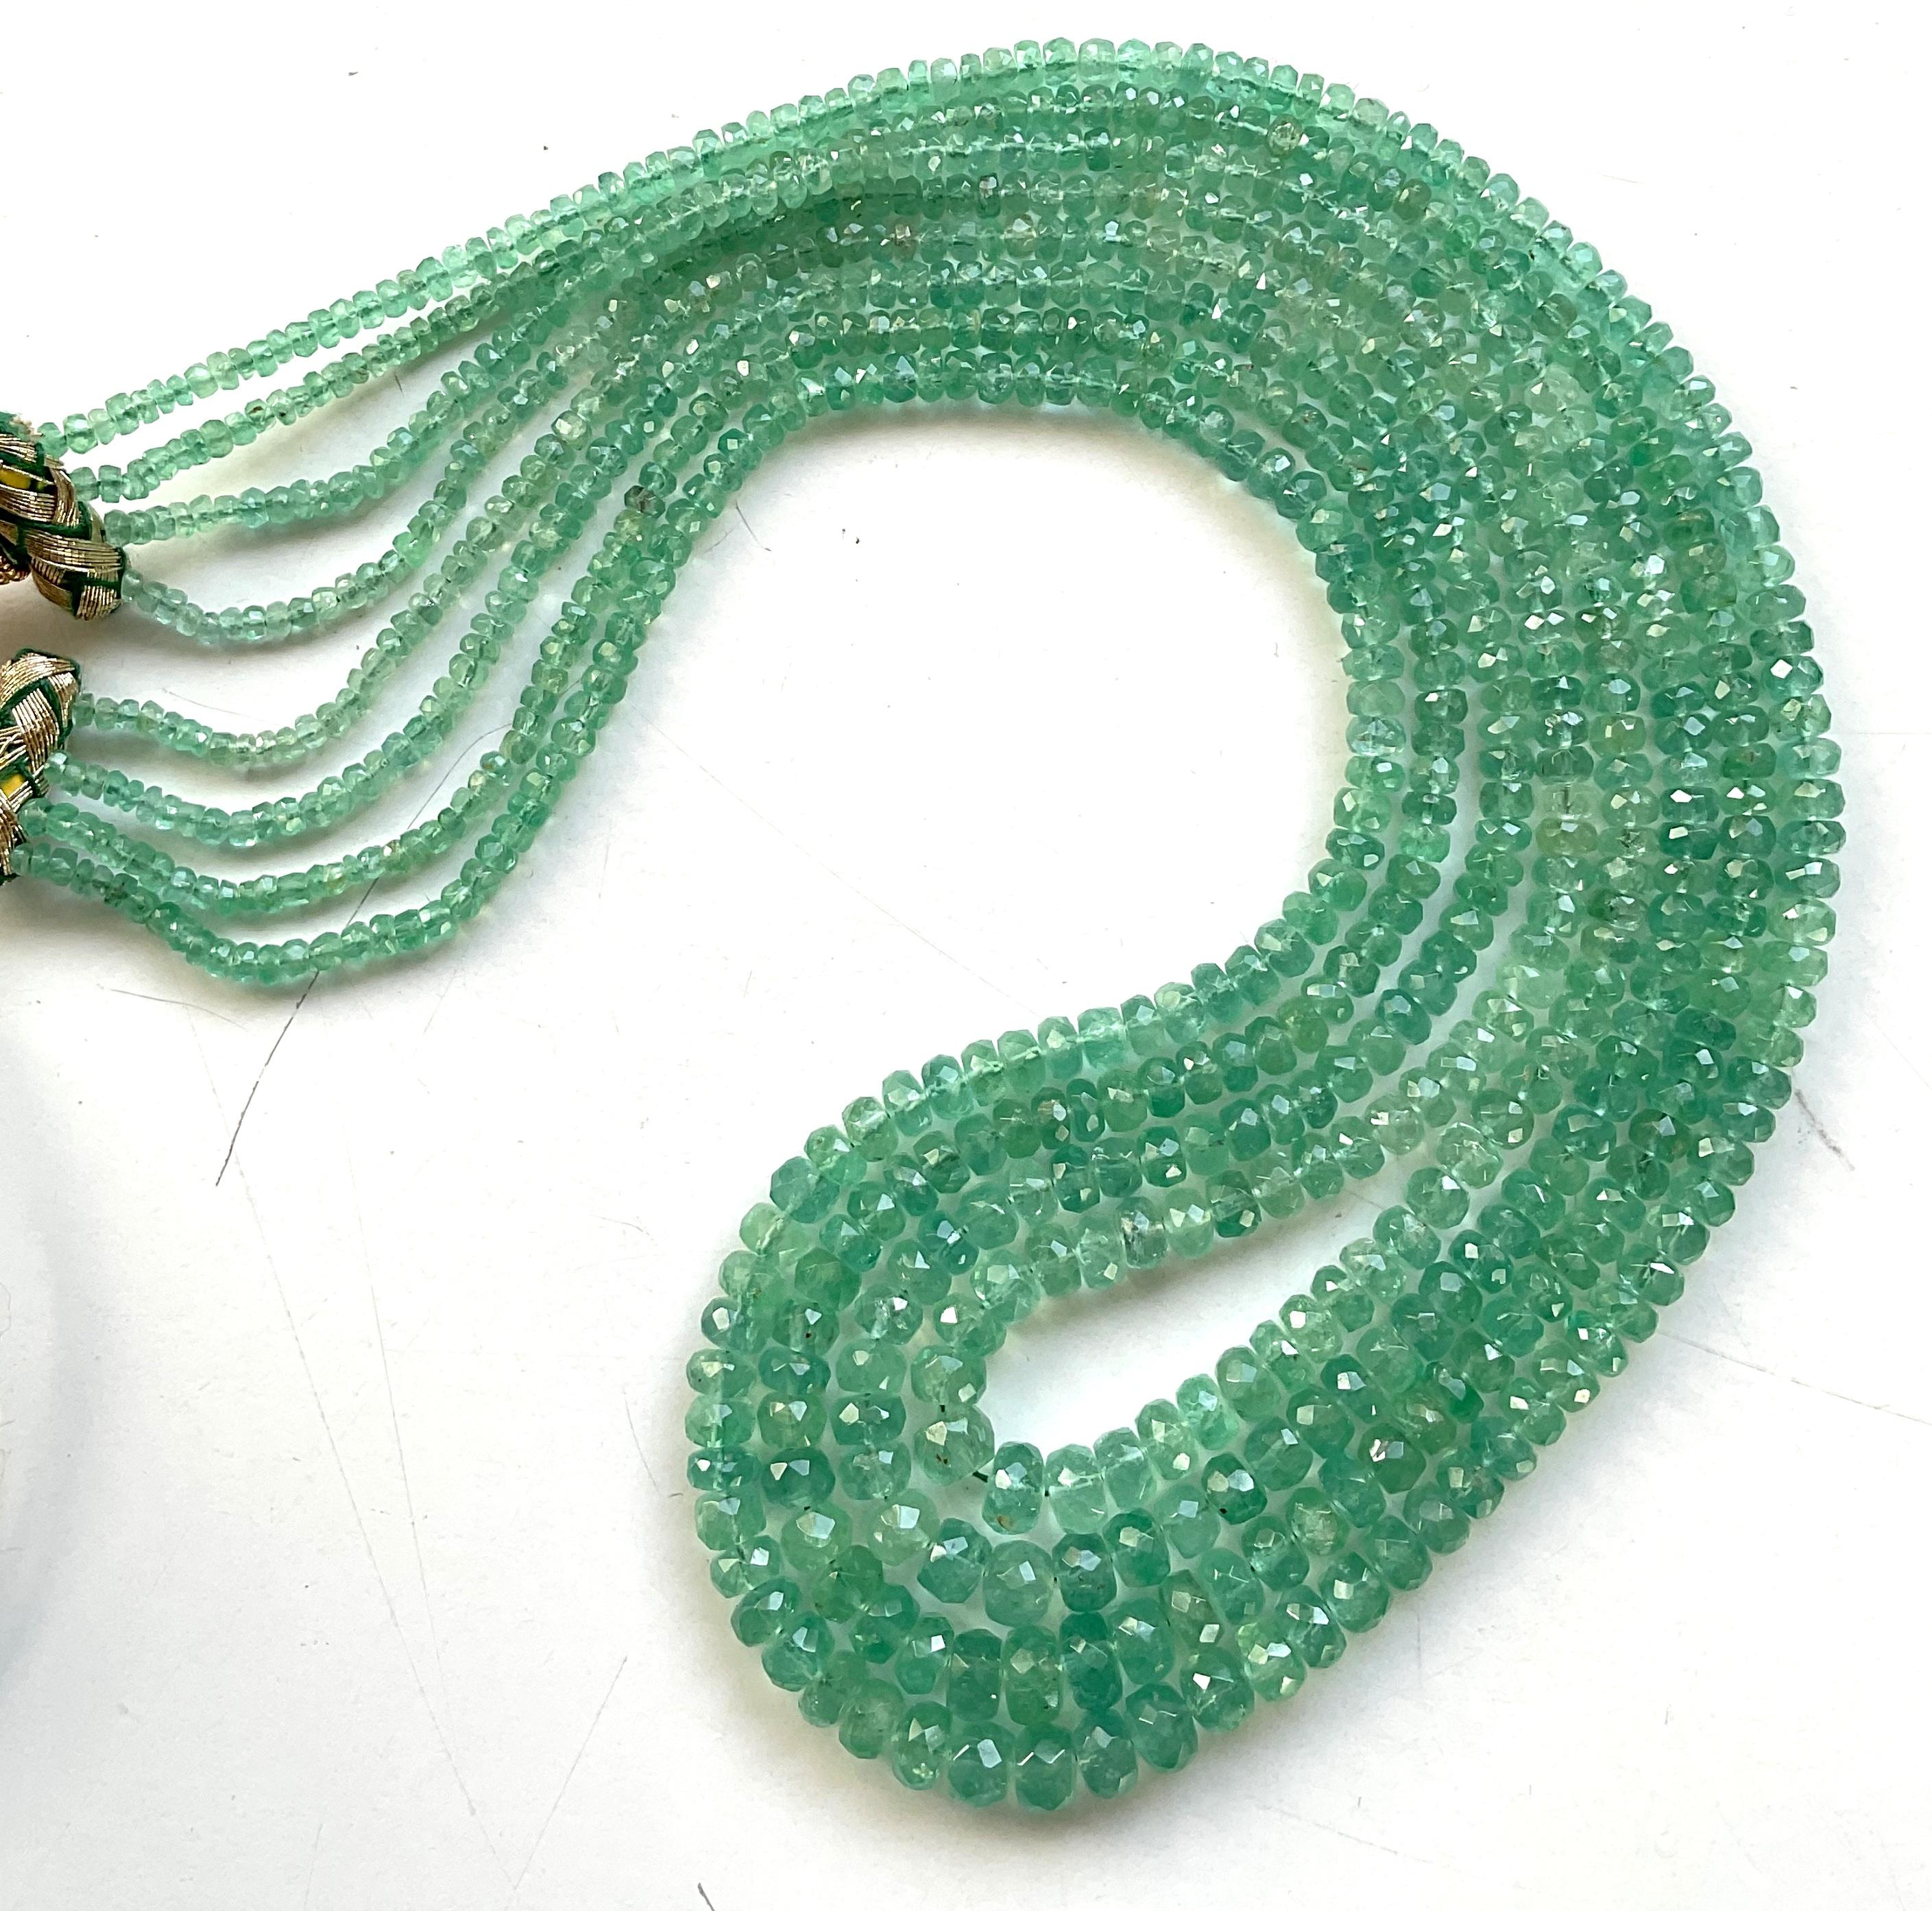 198.40 Carats Panjshir Emerald Faceted Beads For Fine Jewelry Natural Gemstone For Sale 1